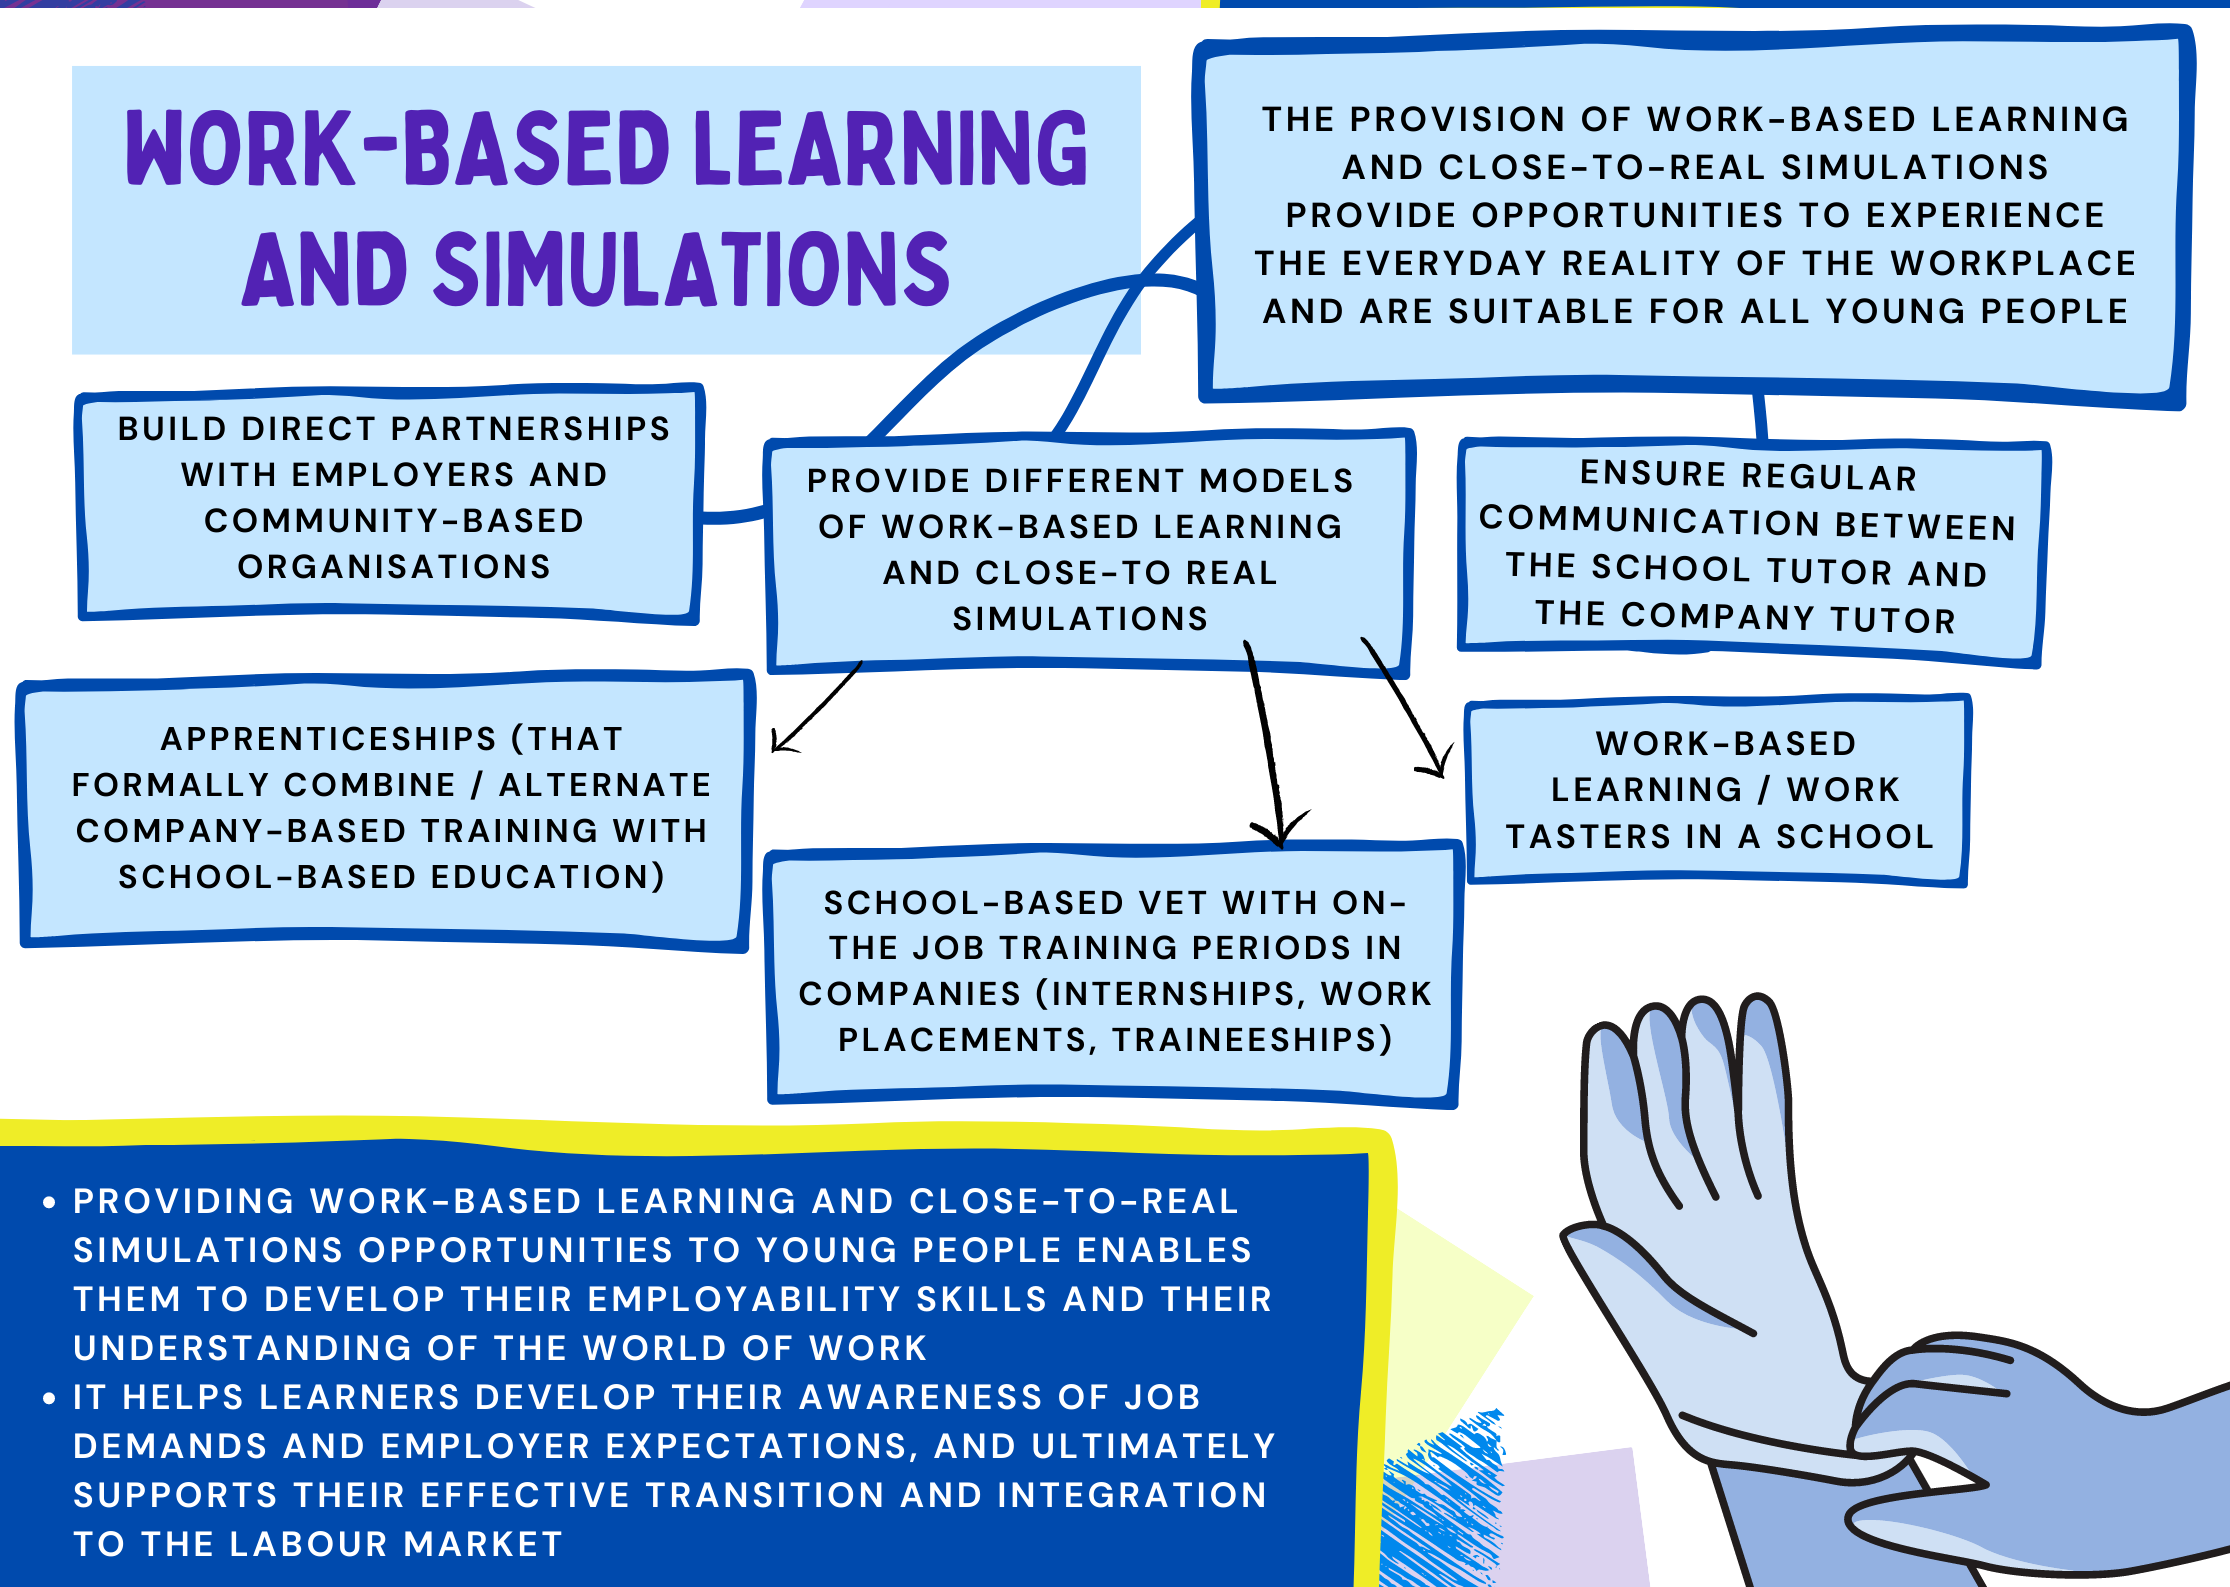 17_work-based learning and simulations